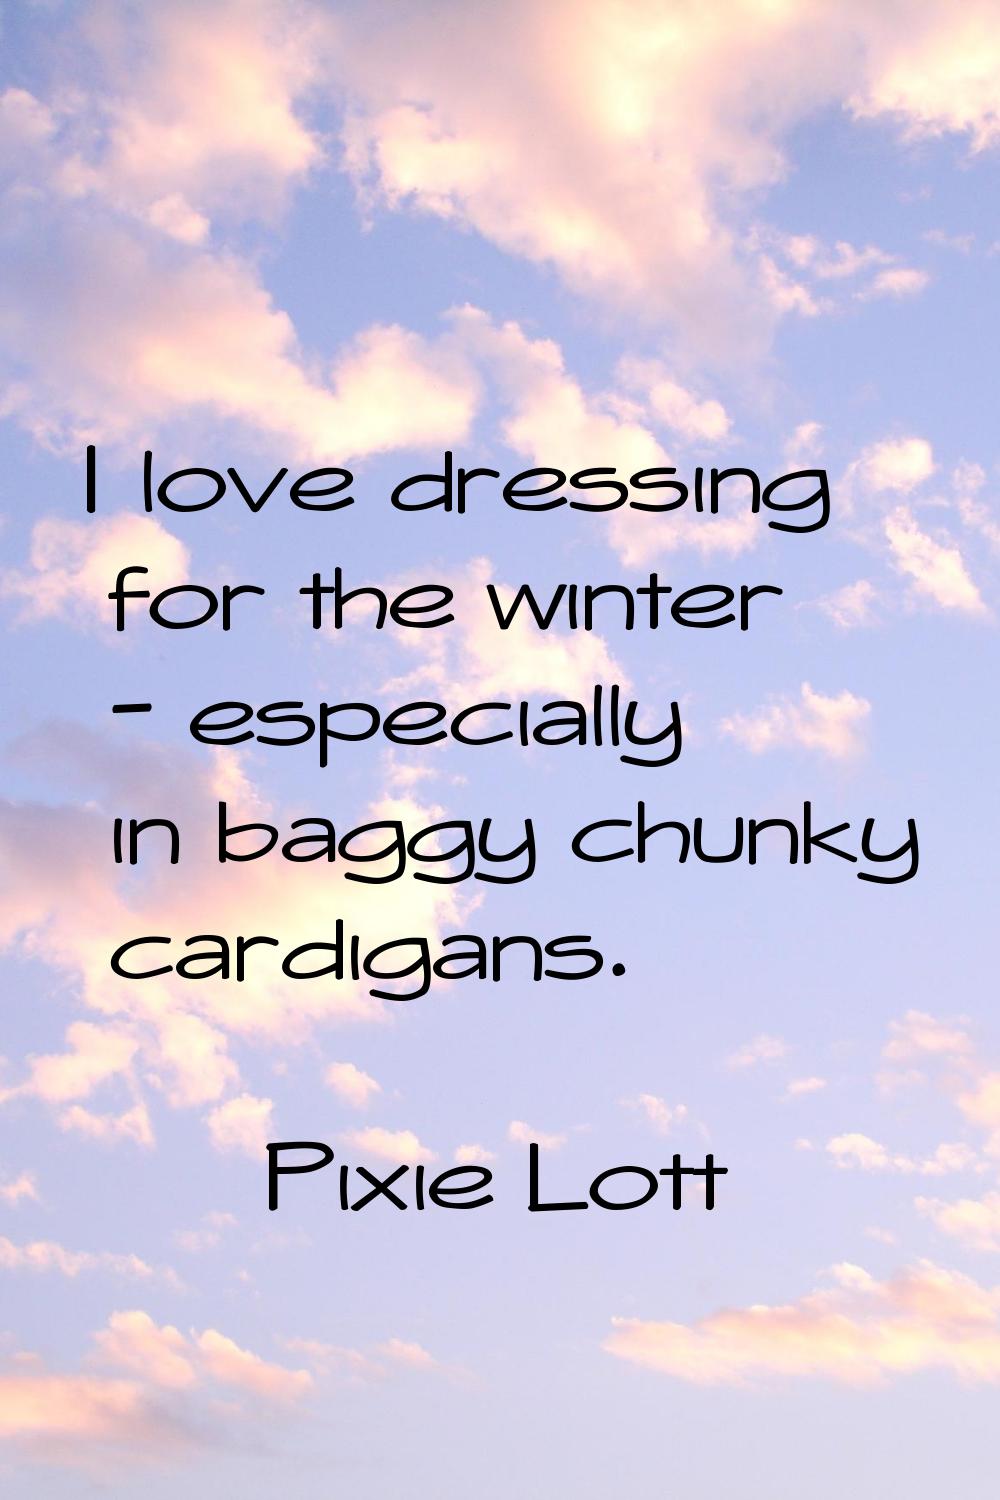 I love dressing for the winter - especially in baggy chunky cardigans.